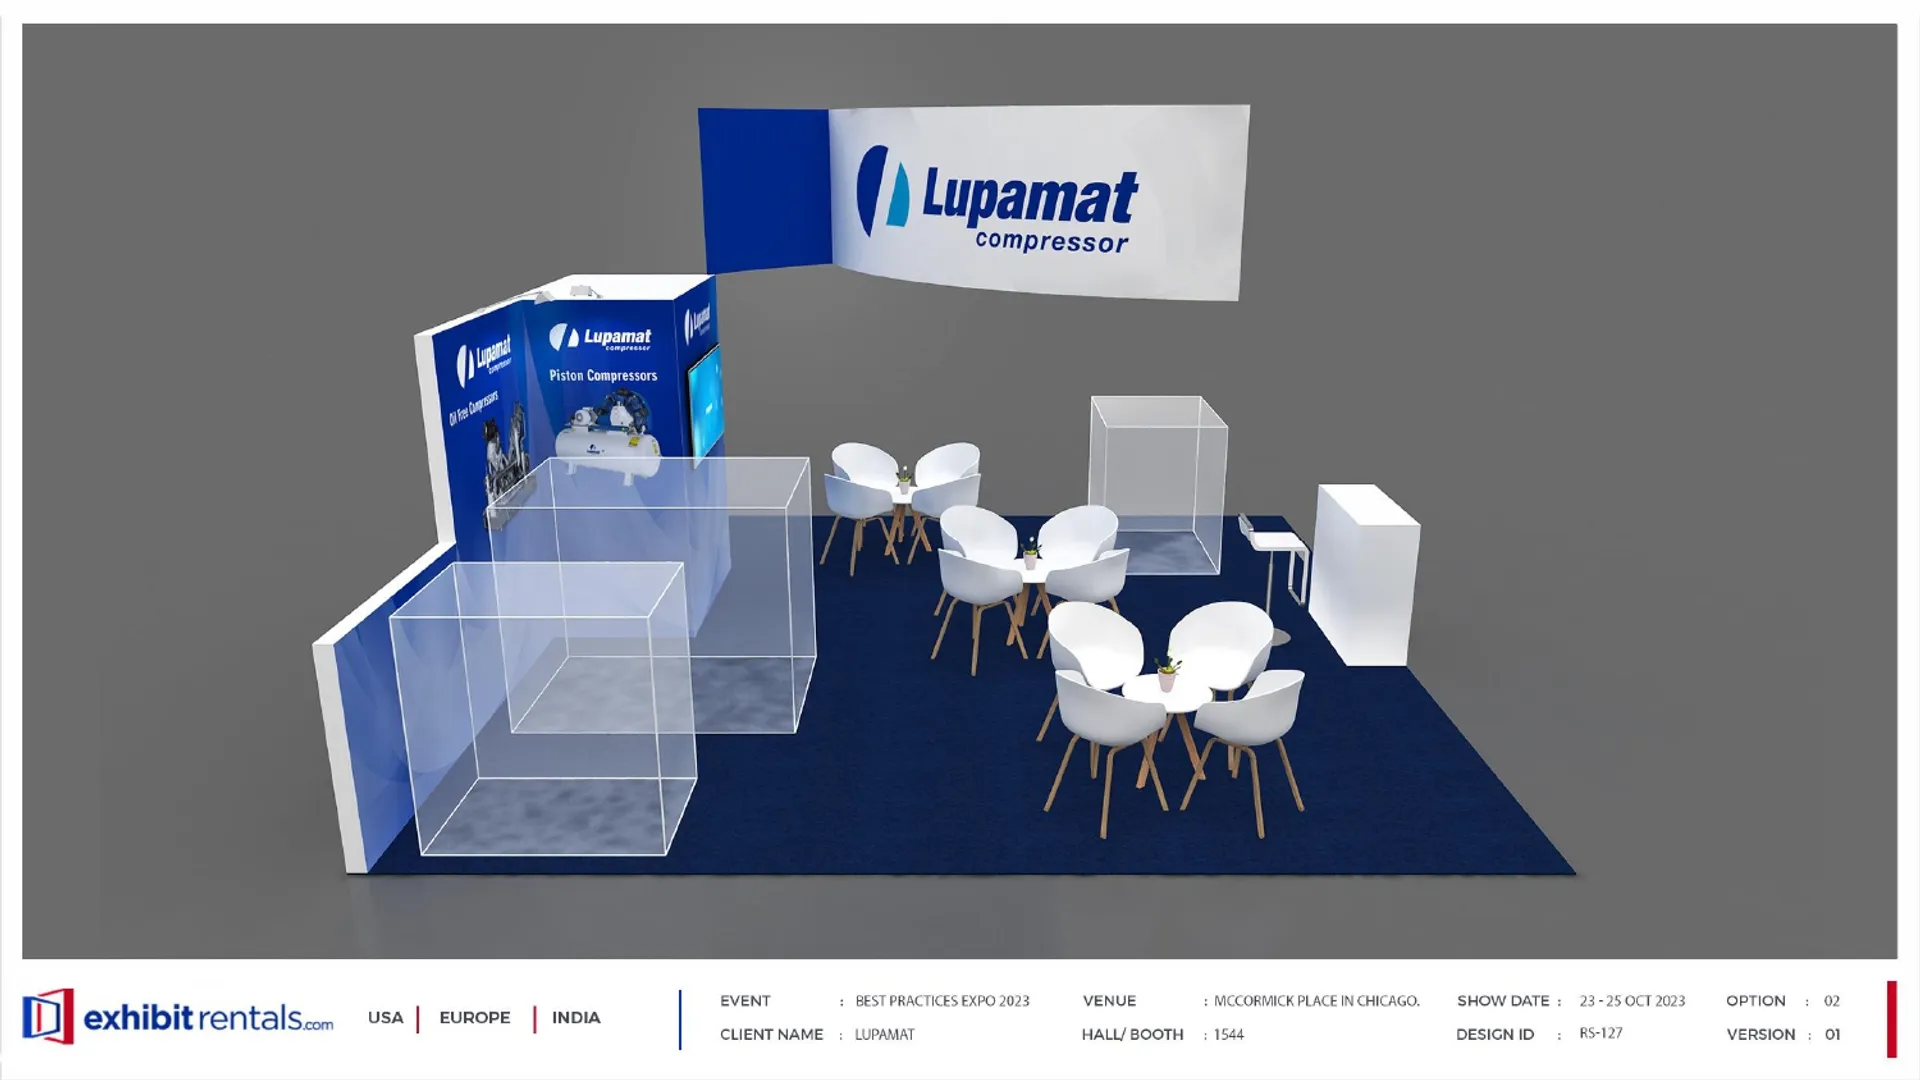 booth-design-projects/Exhibit-Rentals/2024-04-18-40x40-PENINSULA-Project-99/2.1_Lupamat_Best practices expo_ER design proposal-21_page-0001-jjxsjw.jpg